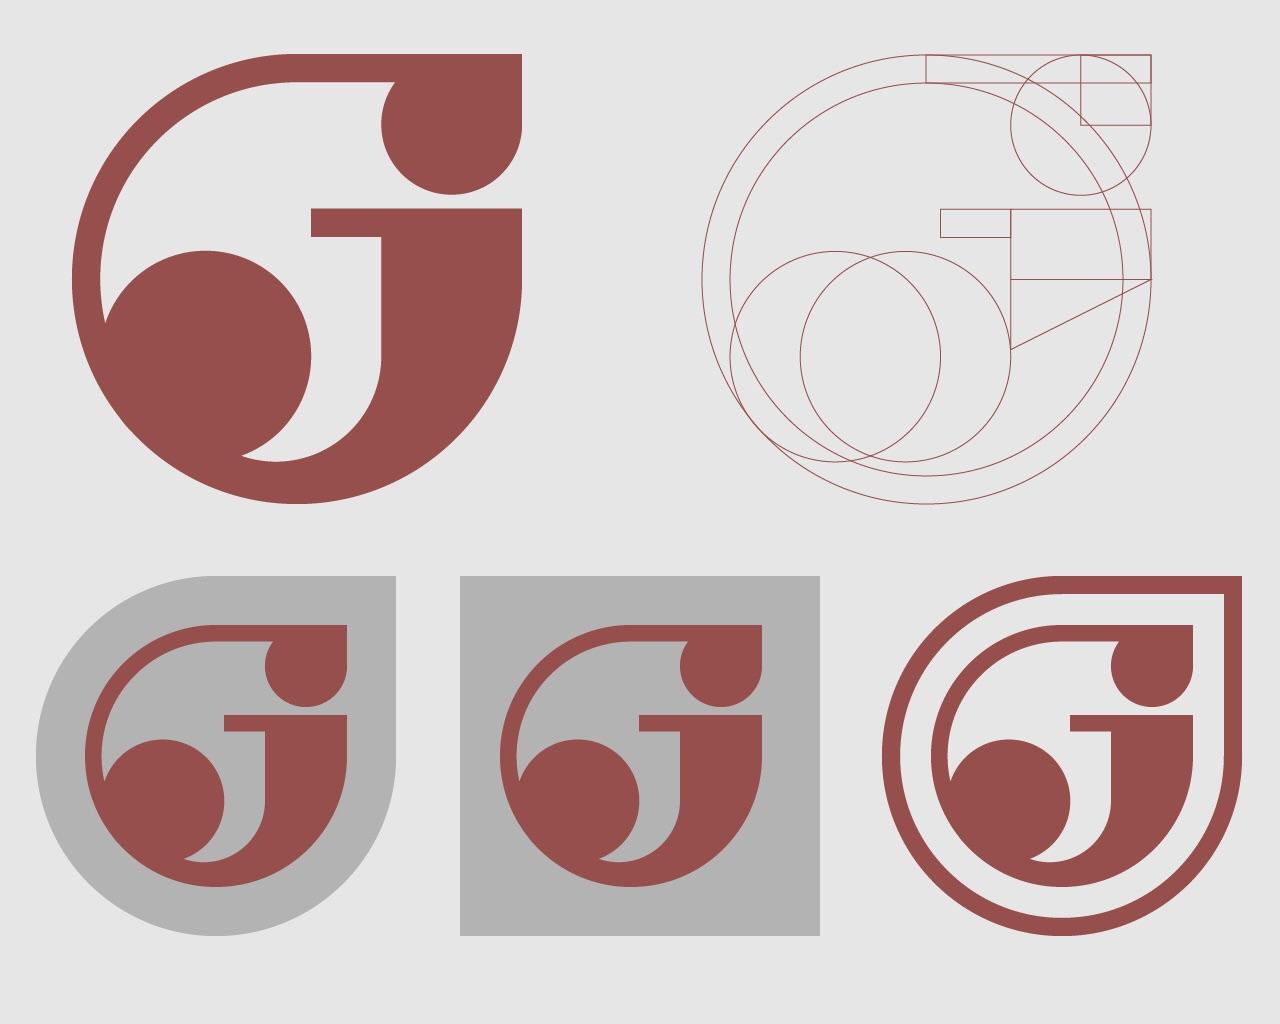 J G Logo - Took everyone's feedback from the previous “JG” logo post